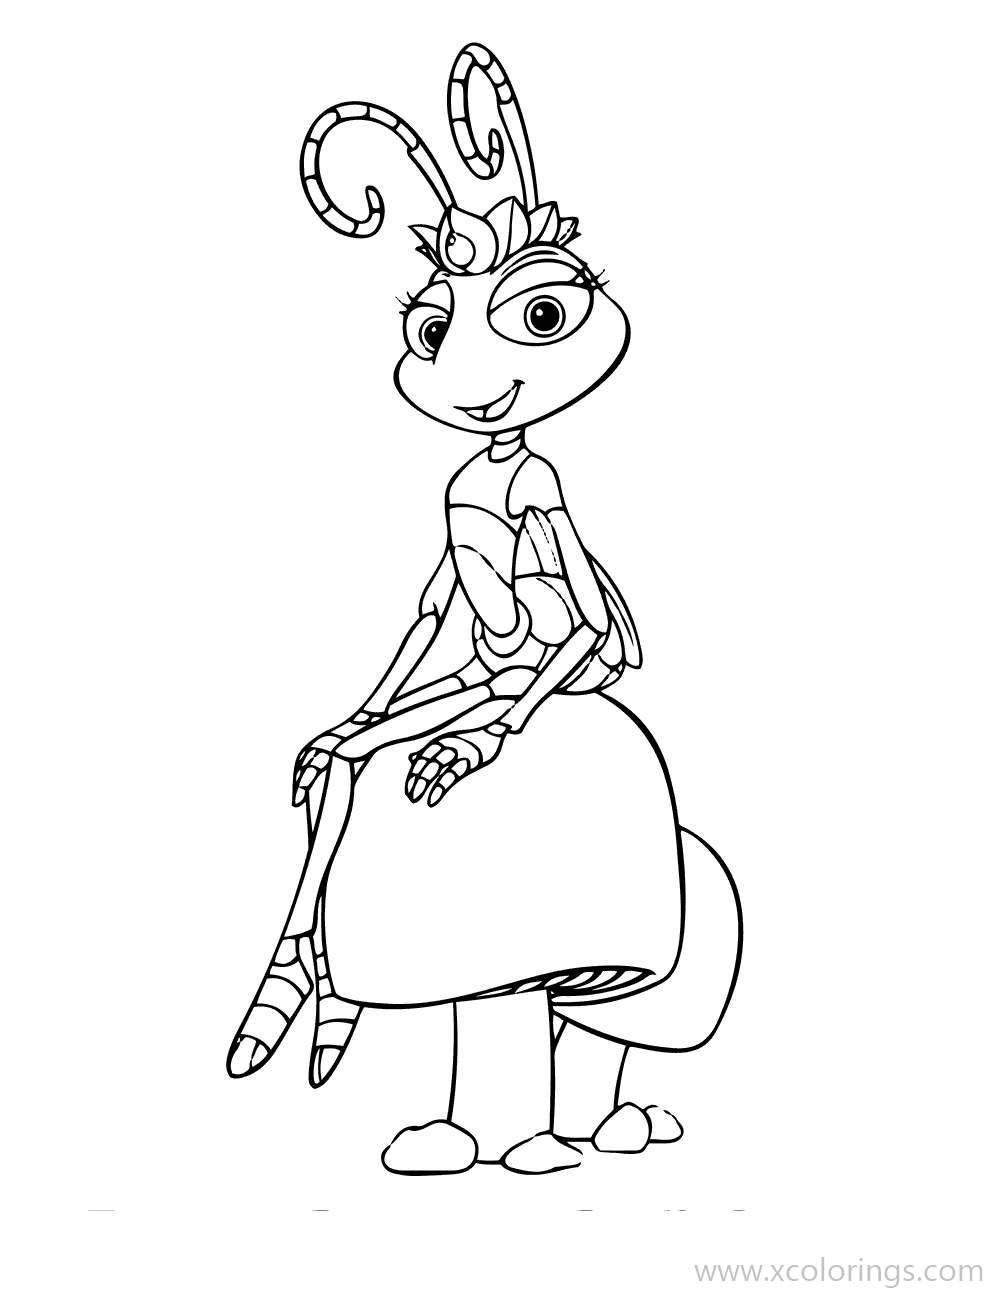 Free A Bugs Life Coloring Pages Princess Atta printable